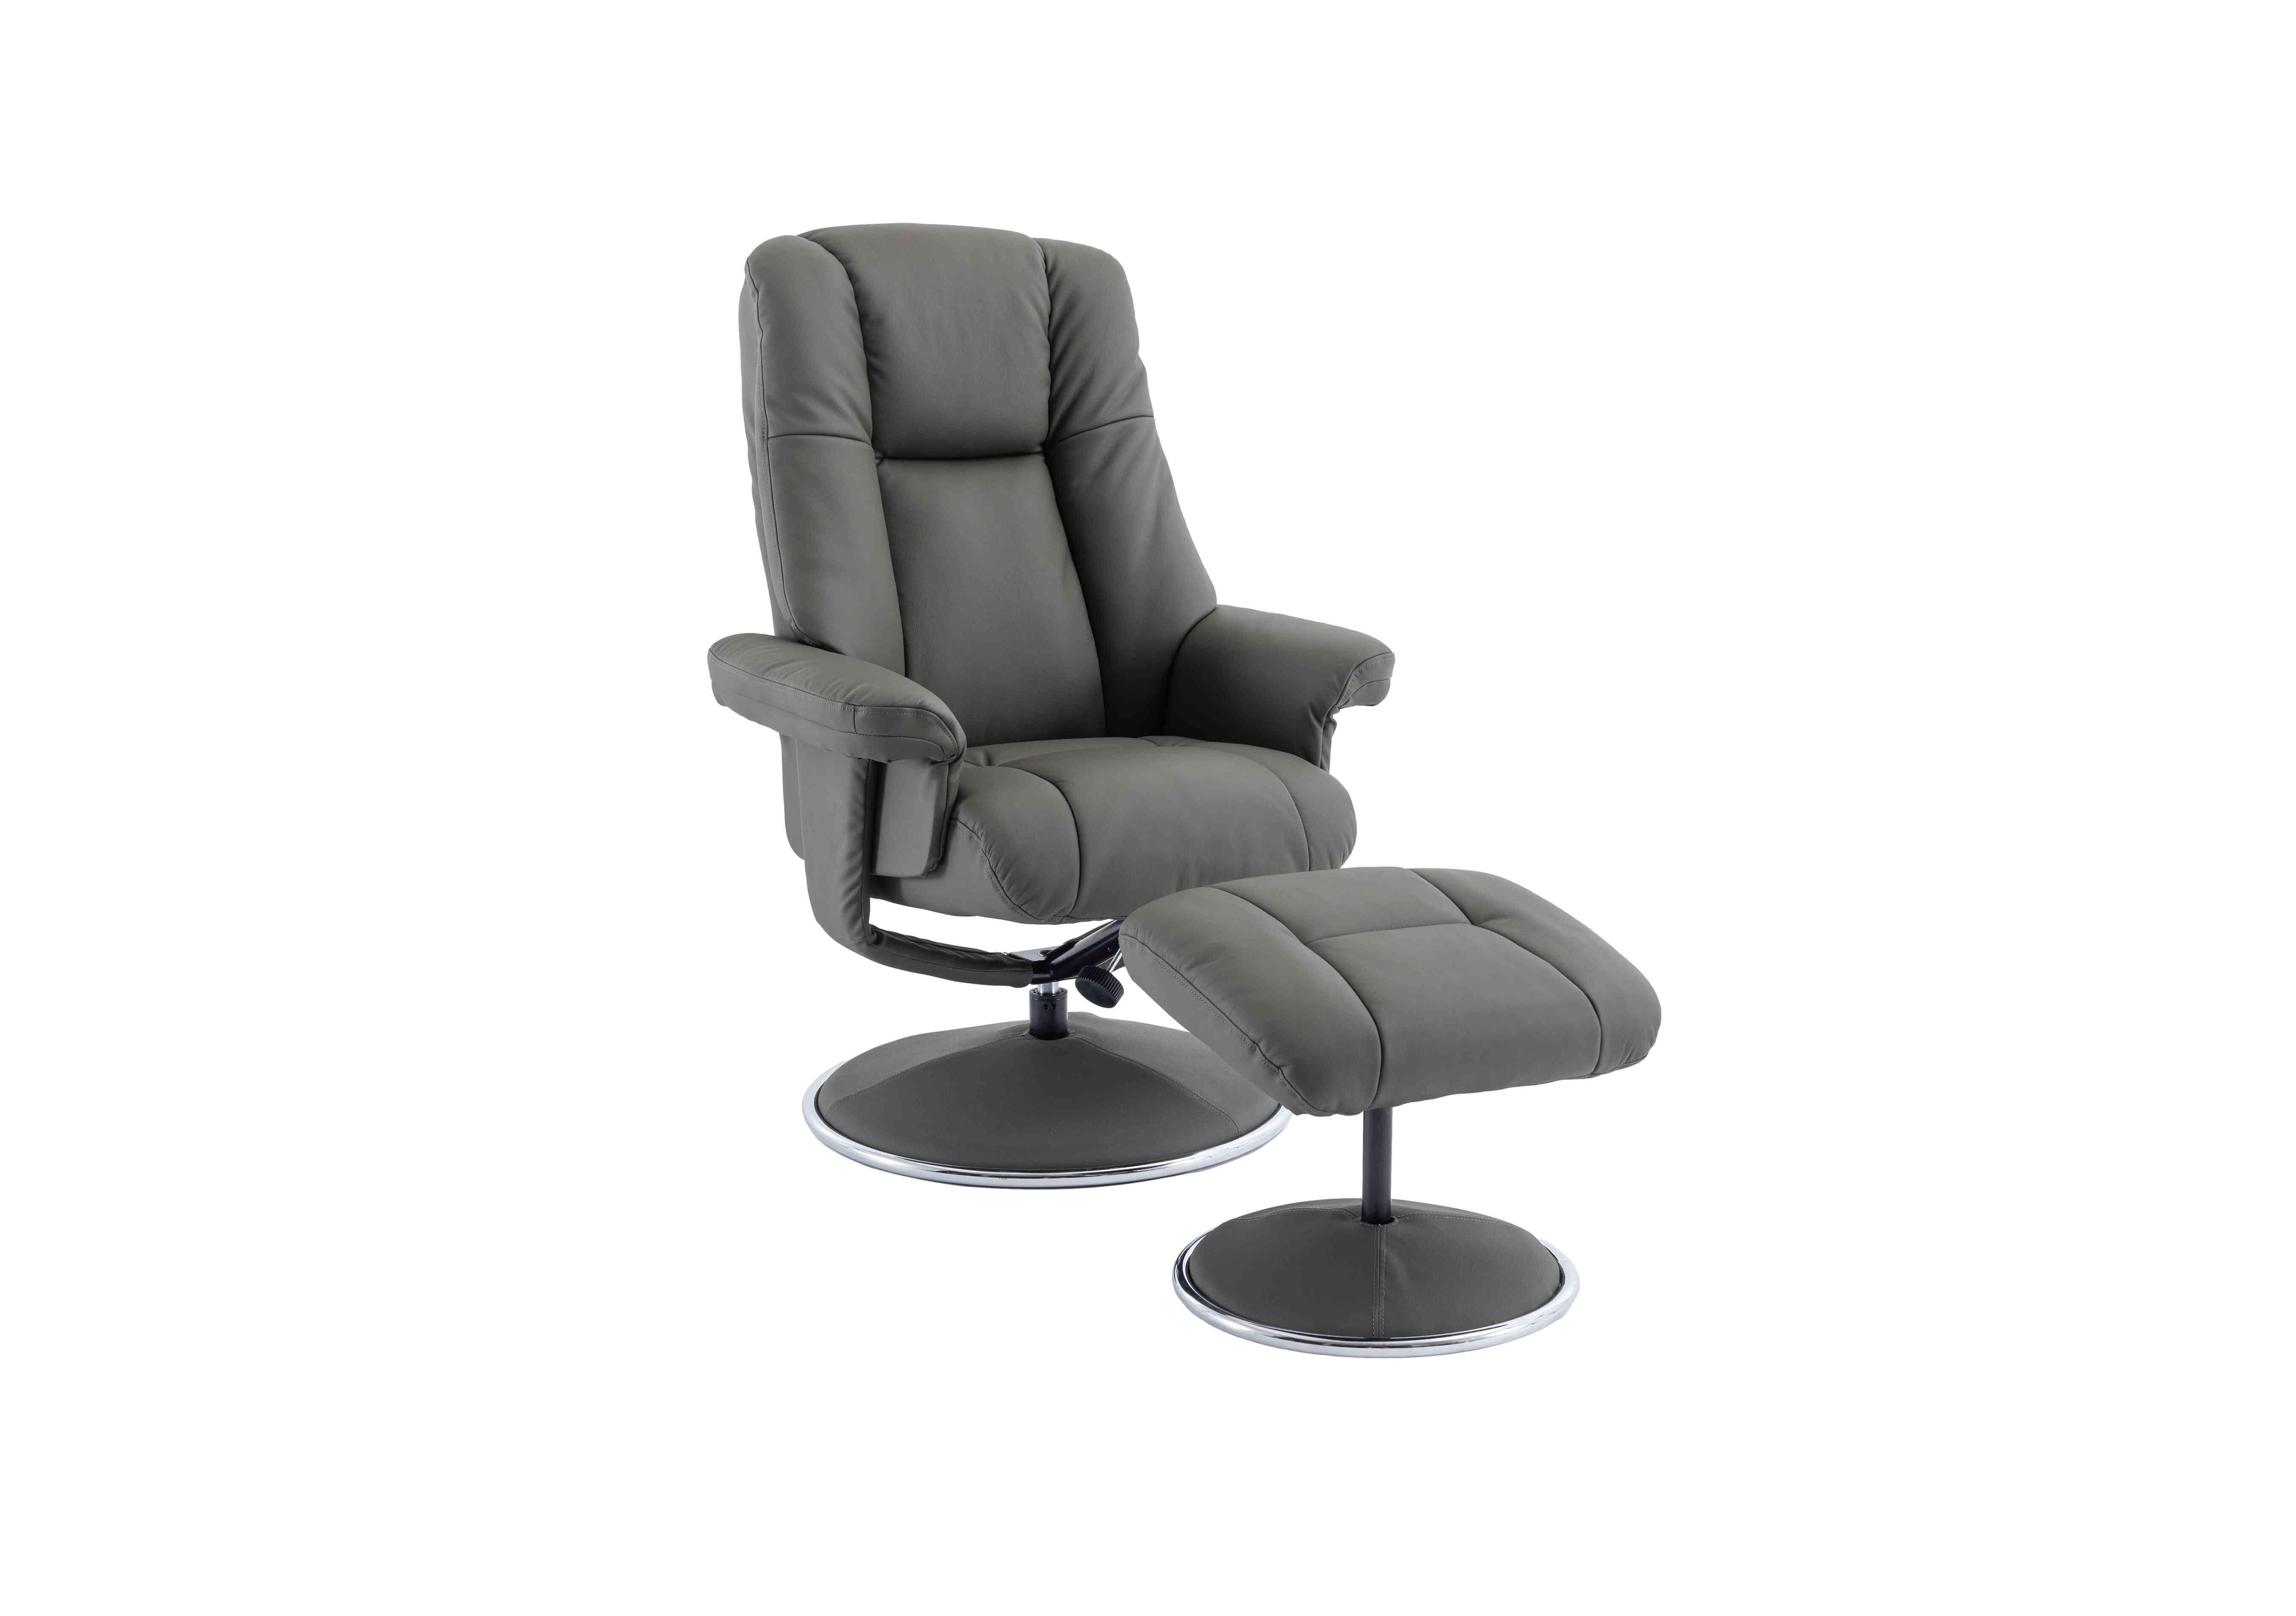 Troyes Leather Look High-Back 360 Swivel Chair and Footstool in Cinder on Furniture Village